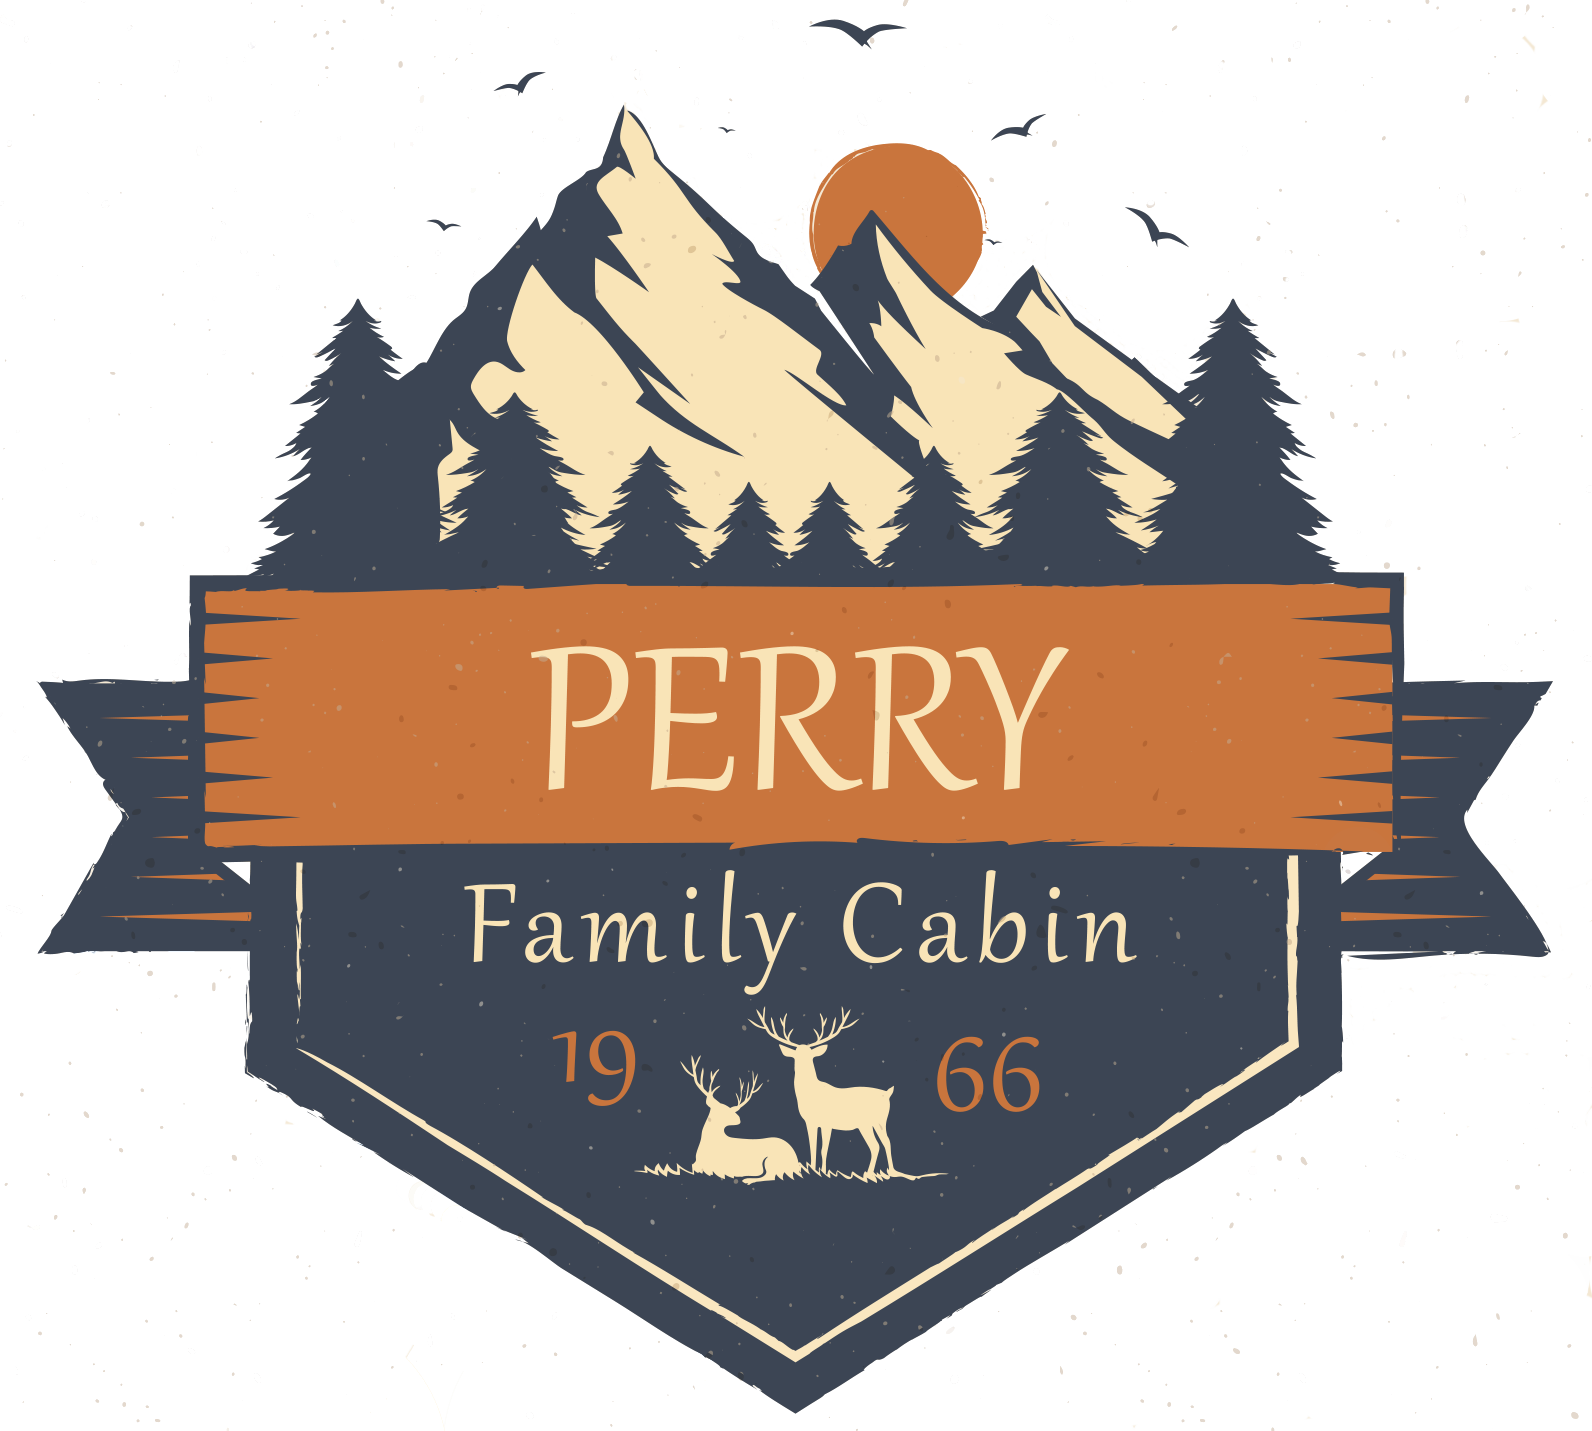 Perry Family Cabin